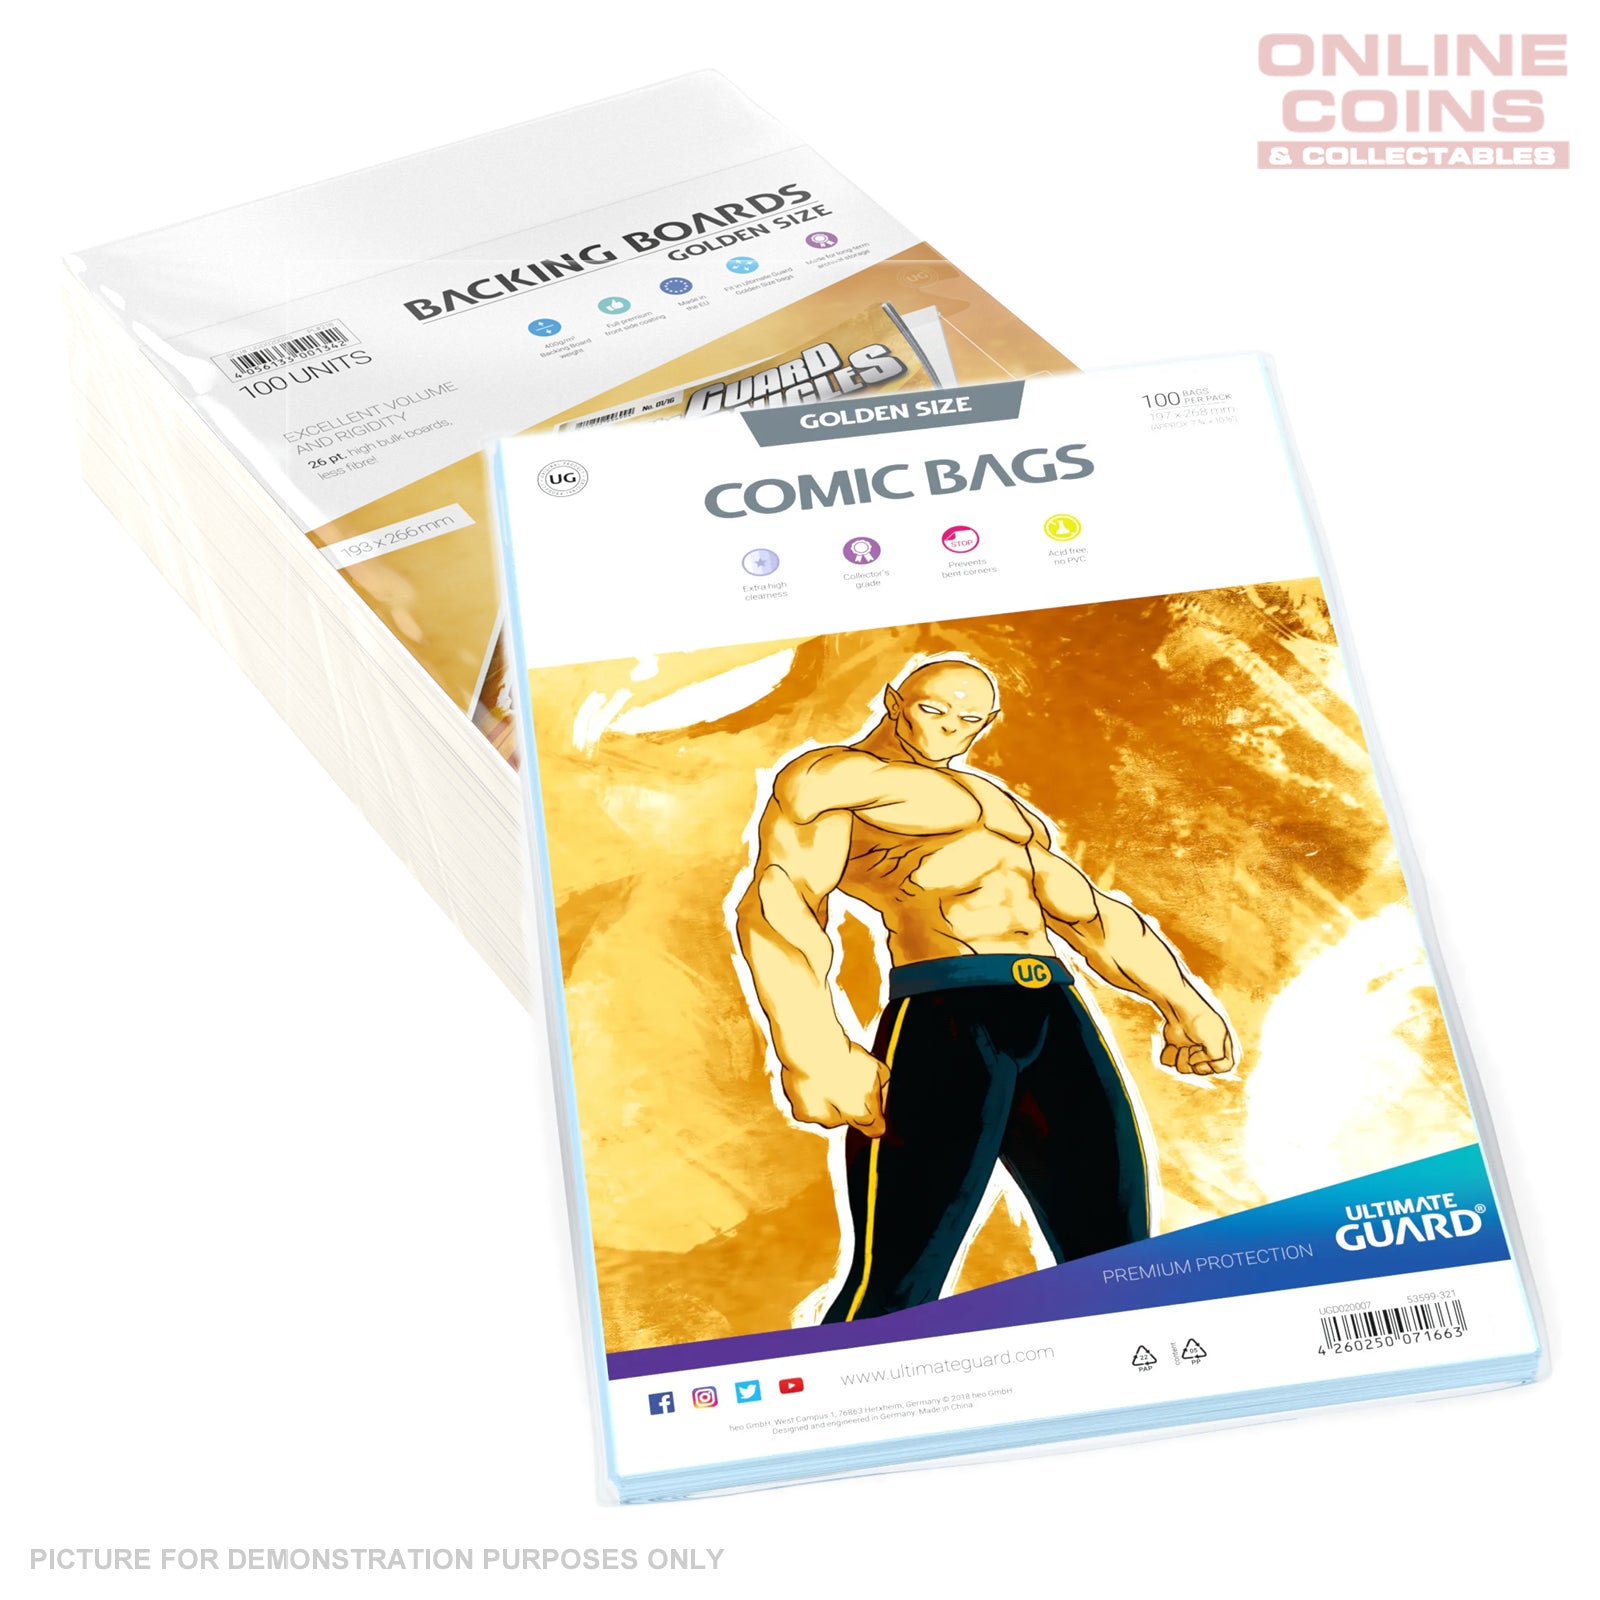 COMIC COMBO - ULTIMATE GUARD - Standard GOLDEN Size Comic Bags & Backing Boards x 100